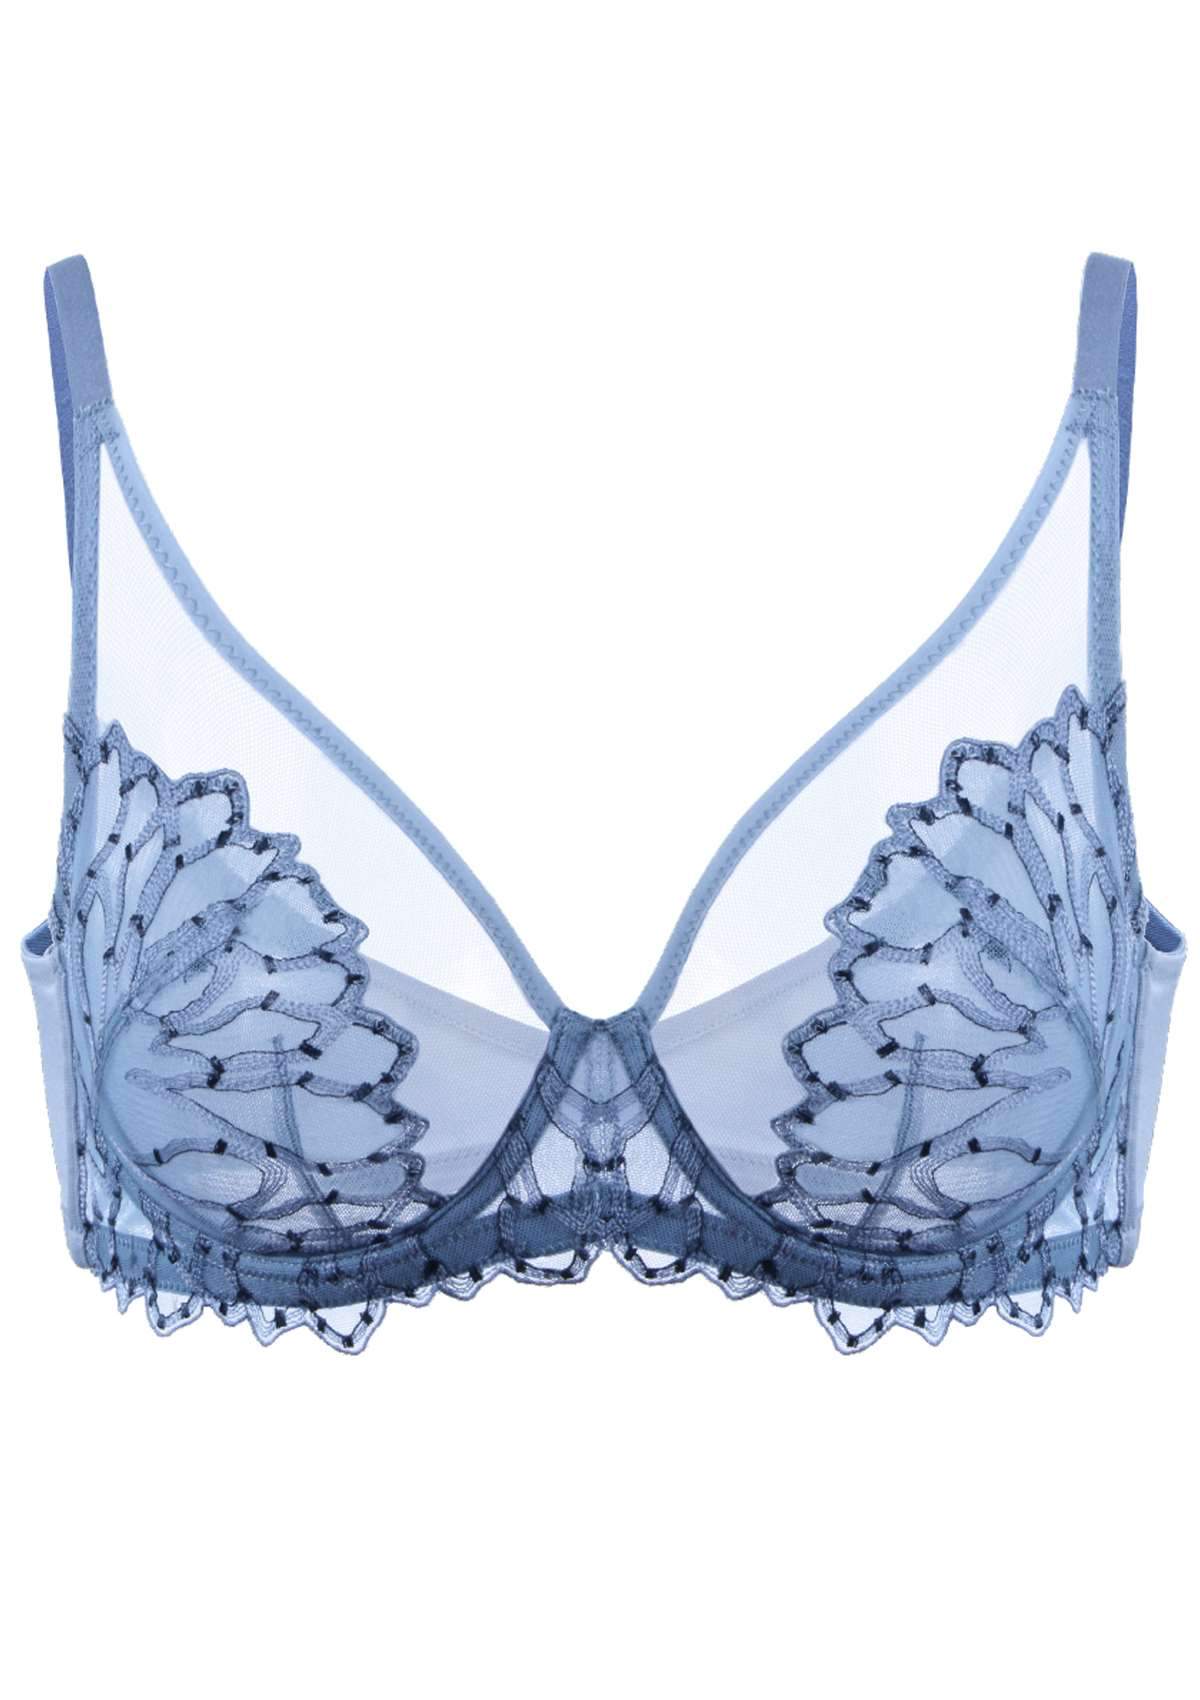 HSIA Chrysanthemum Plus Size Lace Bra: Back Support Bra For Posture - Blue / 34 / C